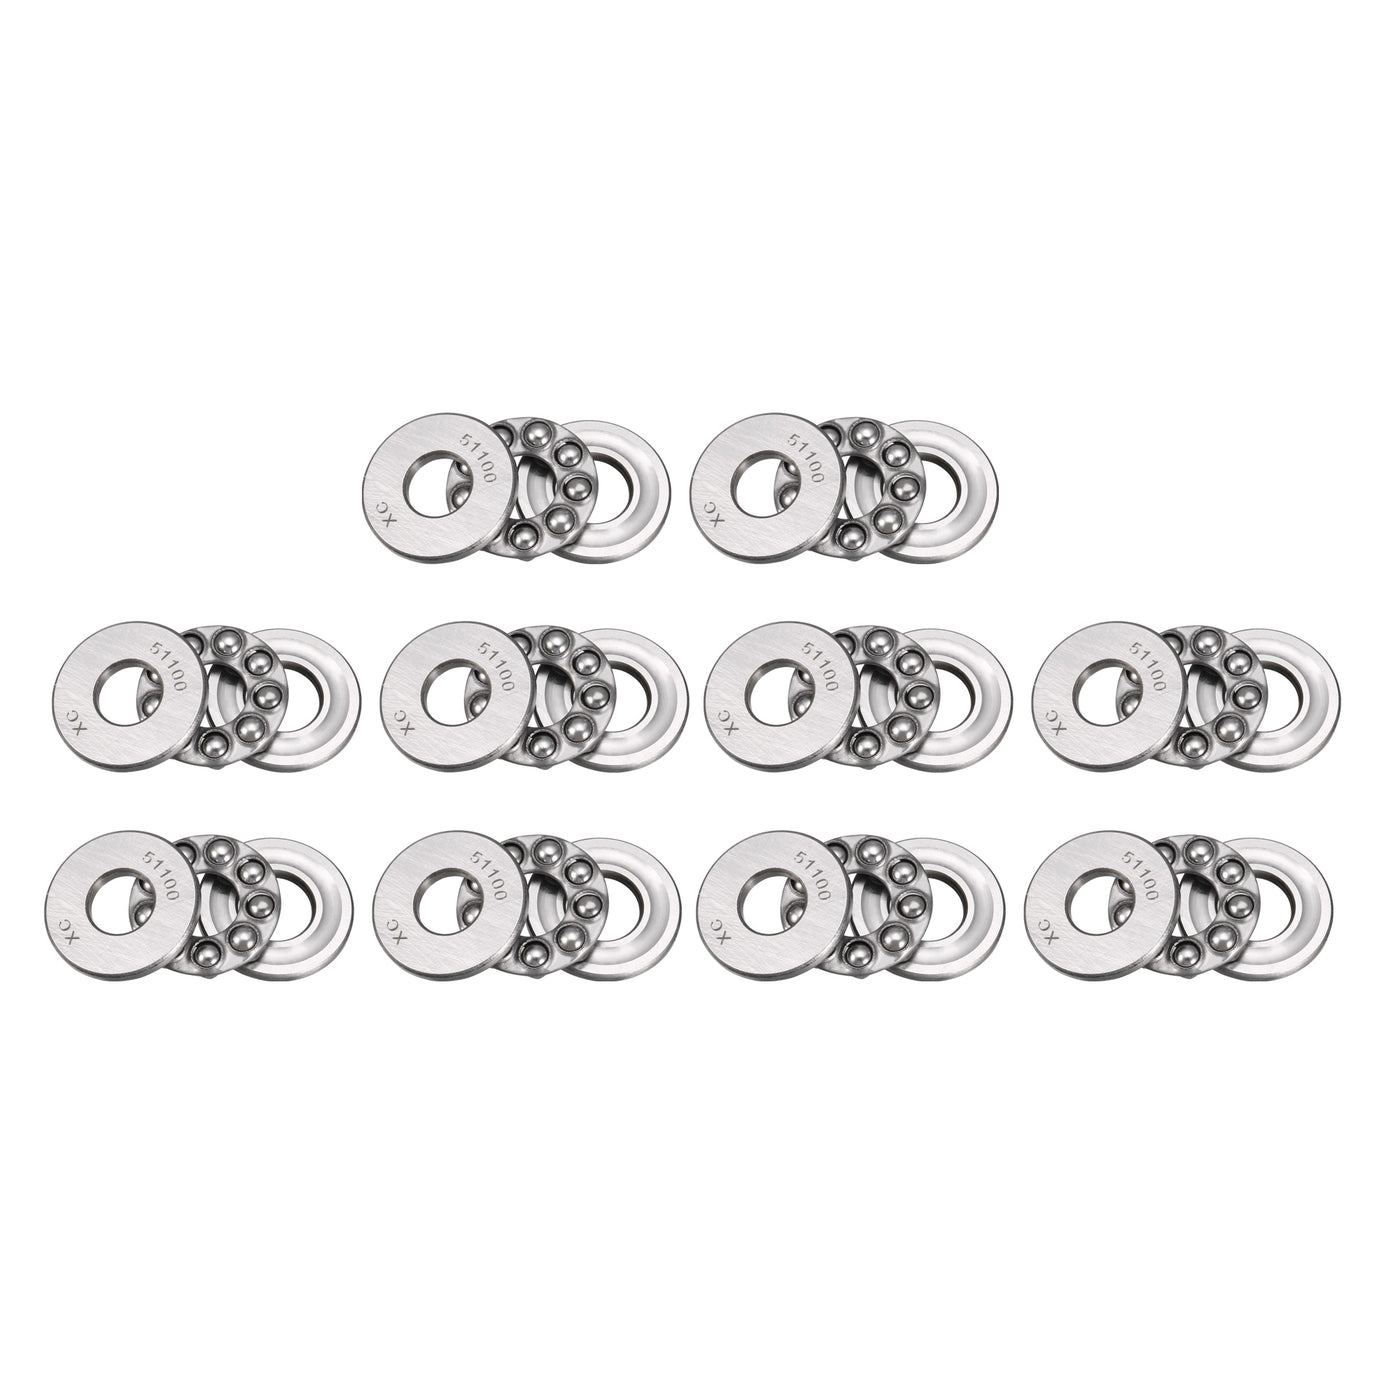 uxcell Uxcell 51100 Miniature Thrust Ball Bearing 10x24x9mm Chrome Steel with Washer 10Pcs